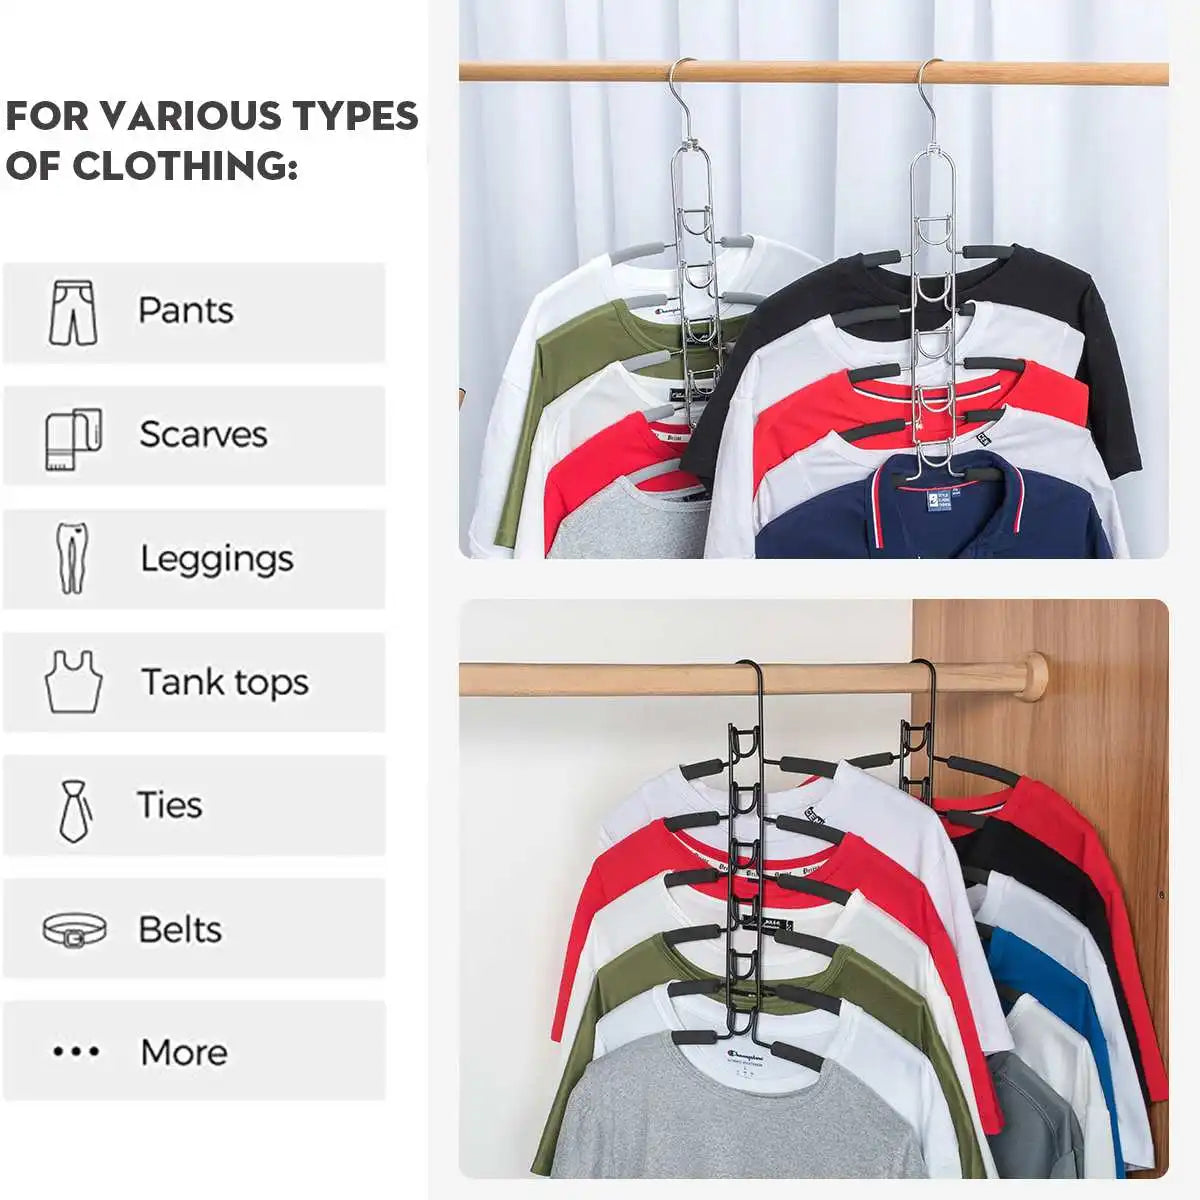 5 Layers Adjustable Clothes Rack